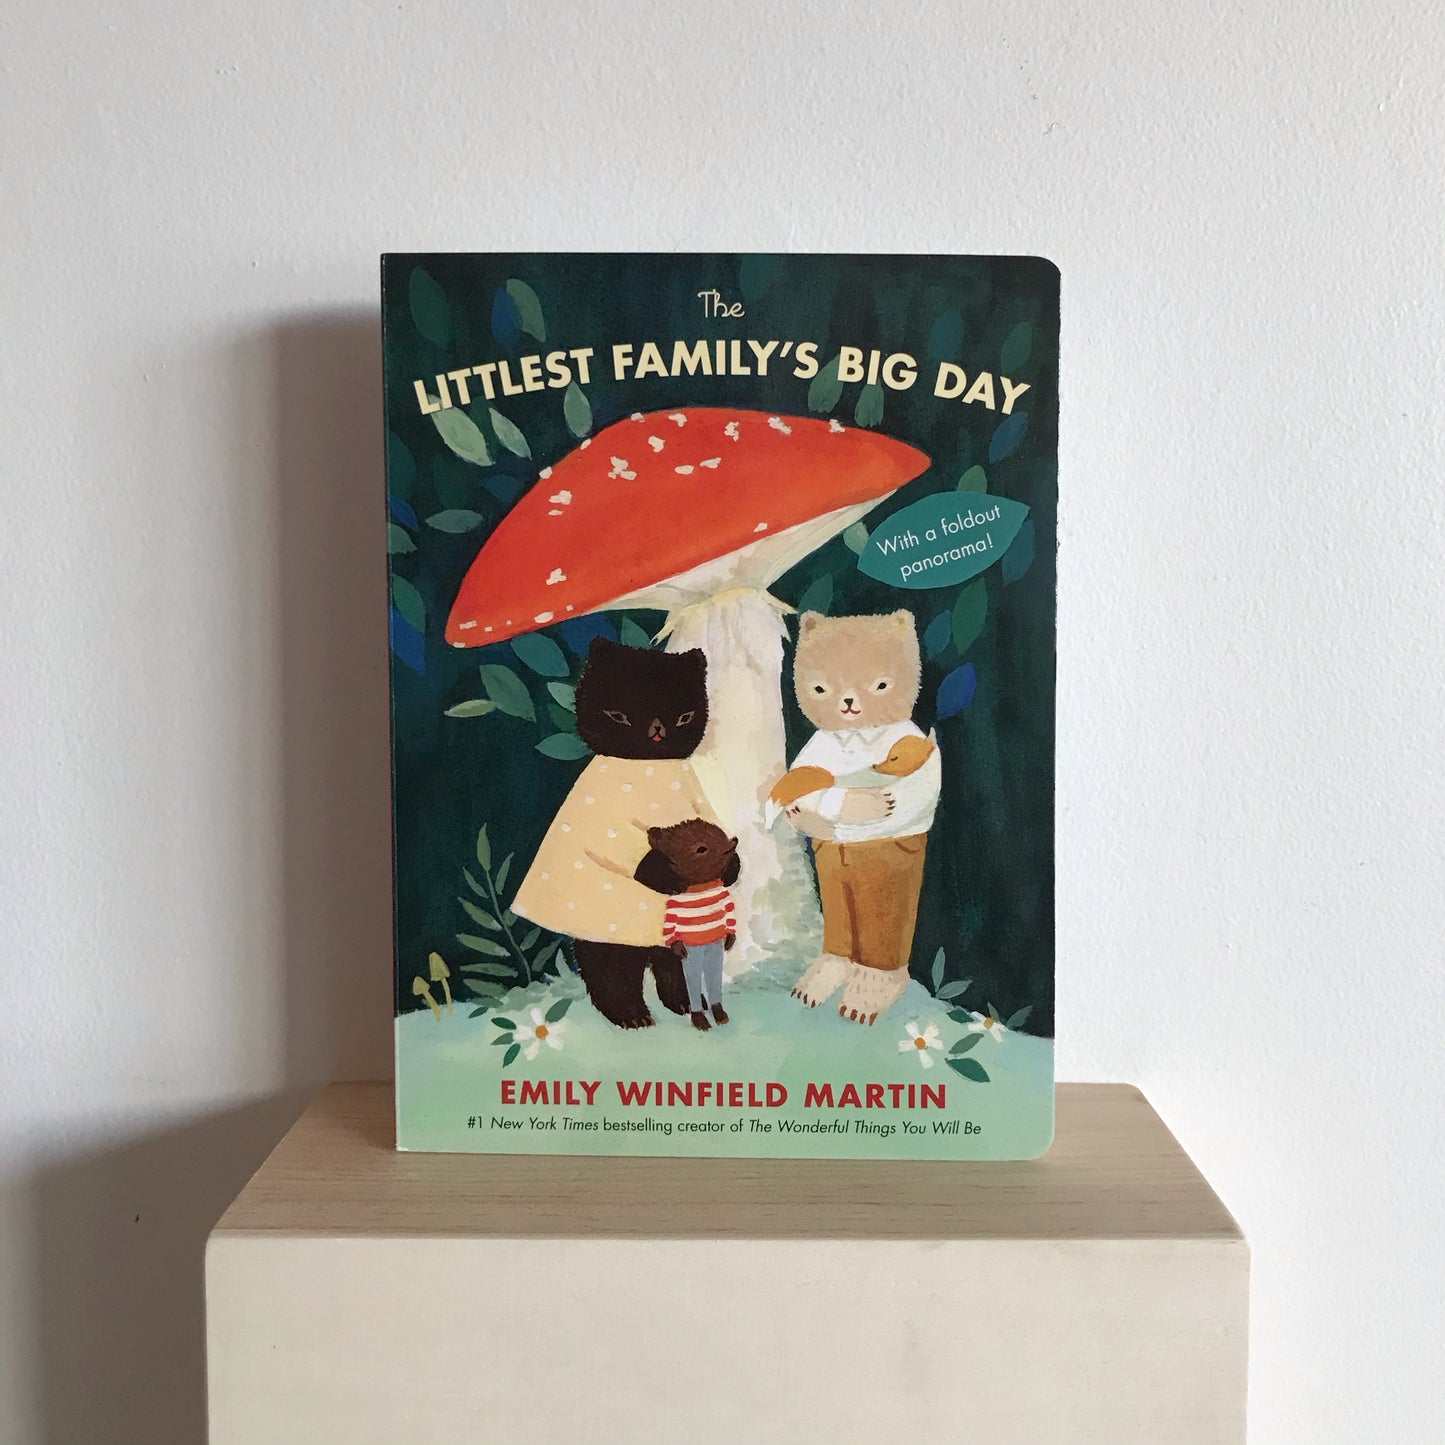 Book: The Littlest Family's Big Day